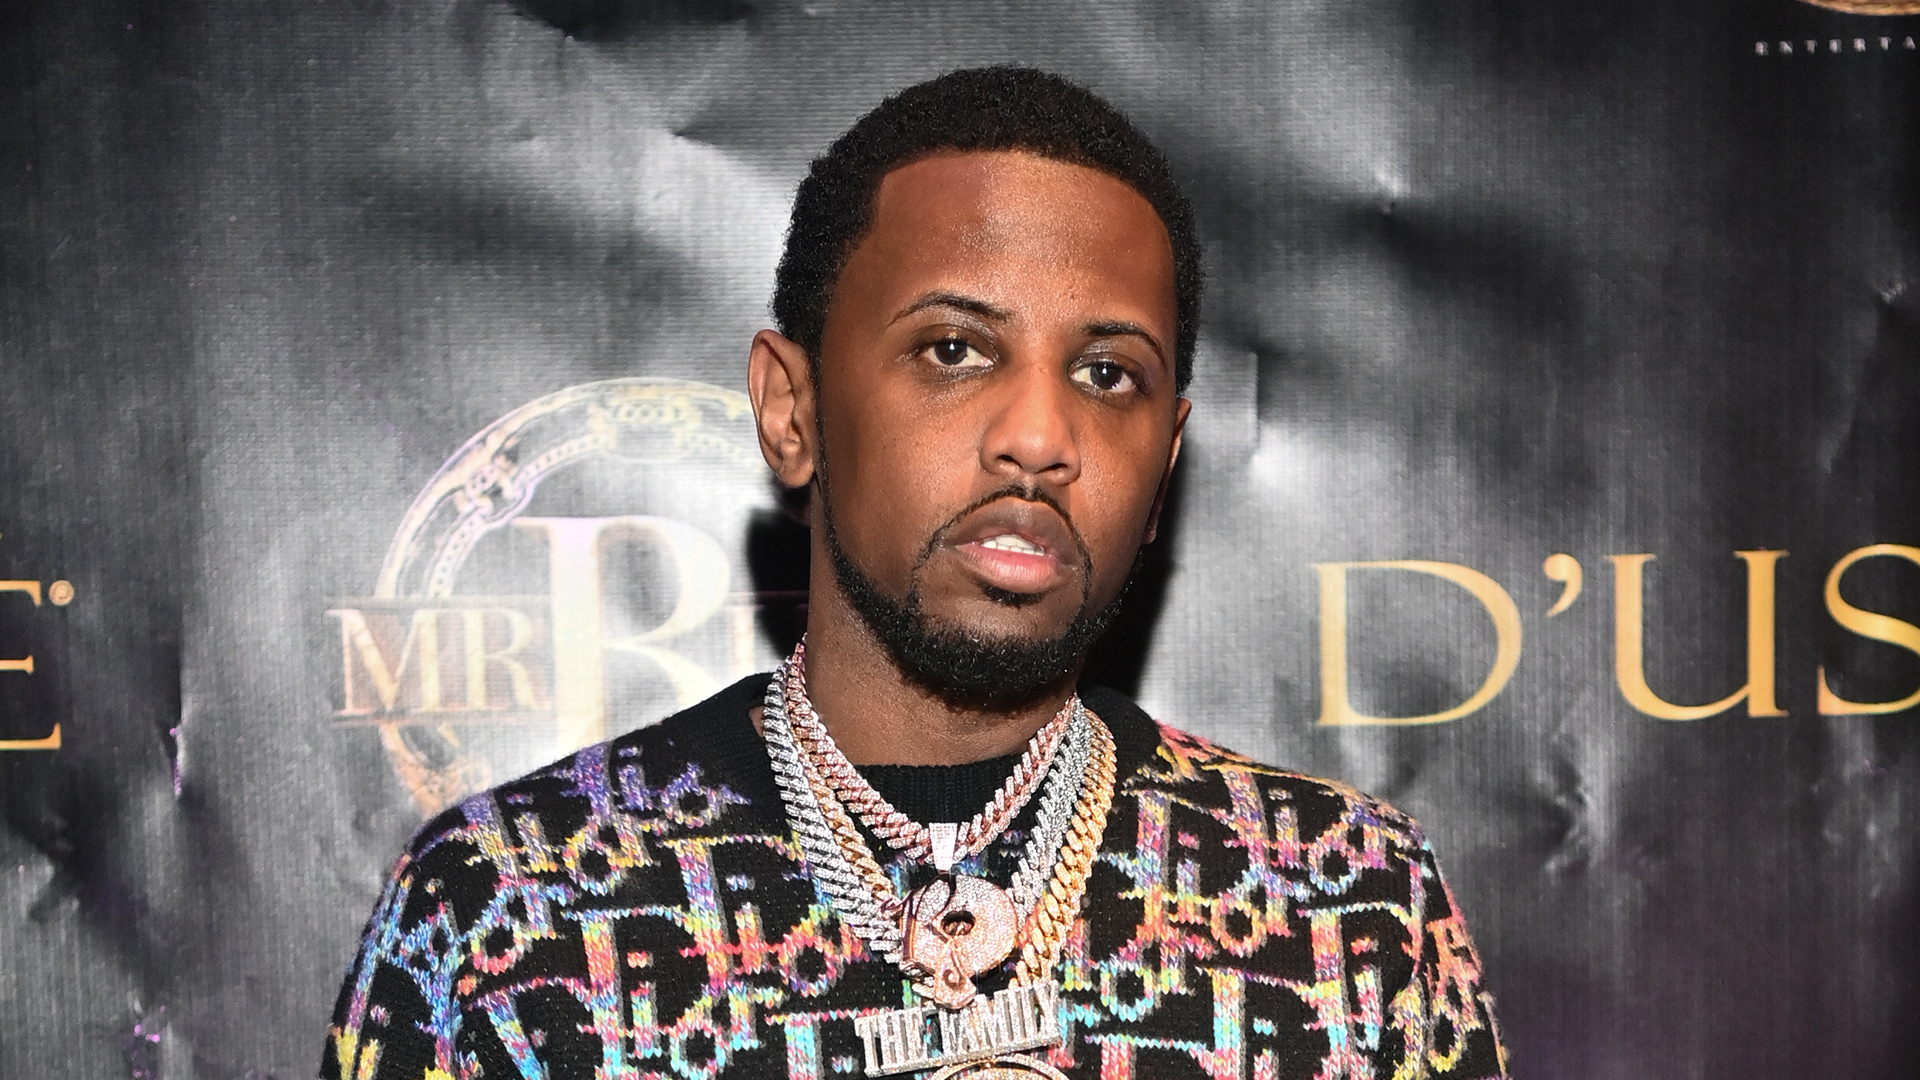 Fabolous Shows Off the ‘Struggle Meal’ He Cooked Up: ‘Don’t Look That Bad’